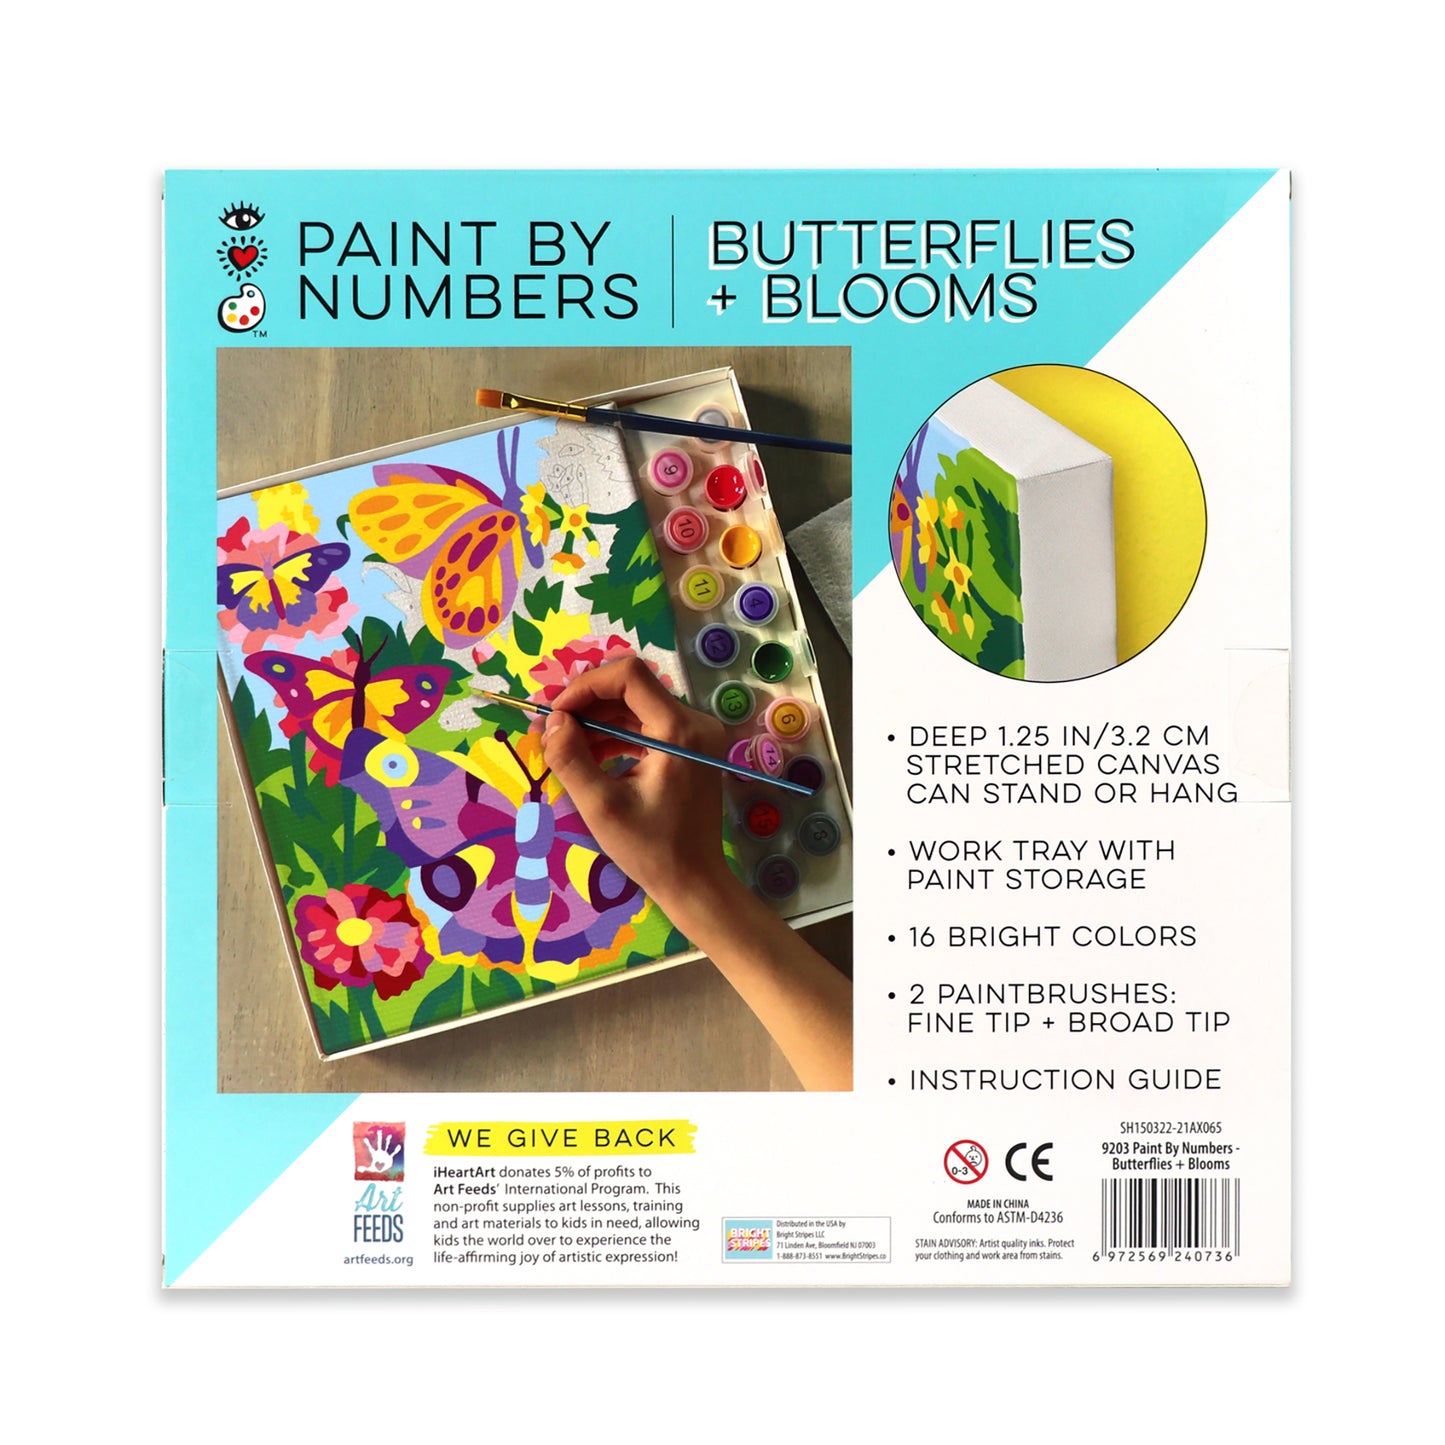 iHeartArt Paint by Numbers Butterflies + Blooms